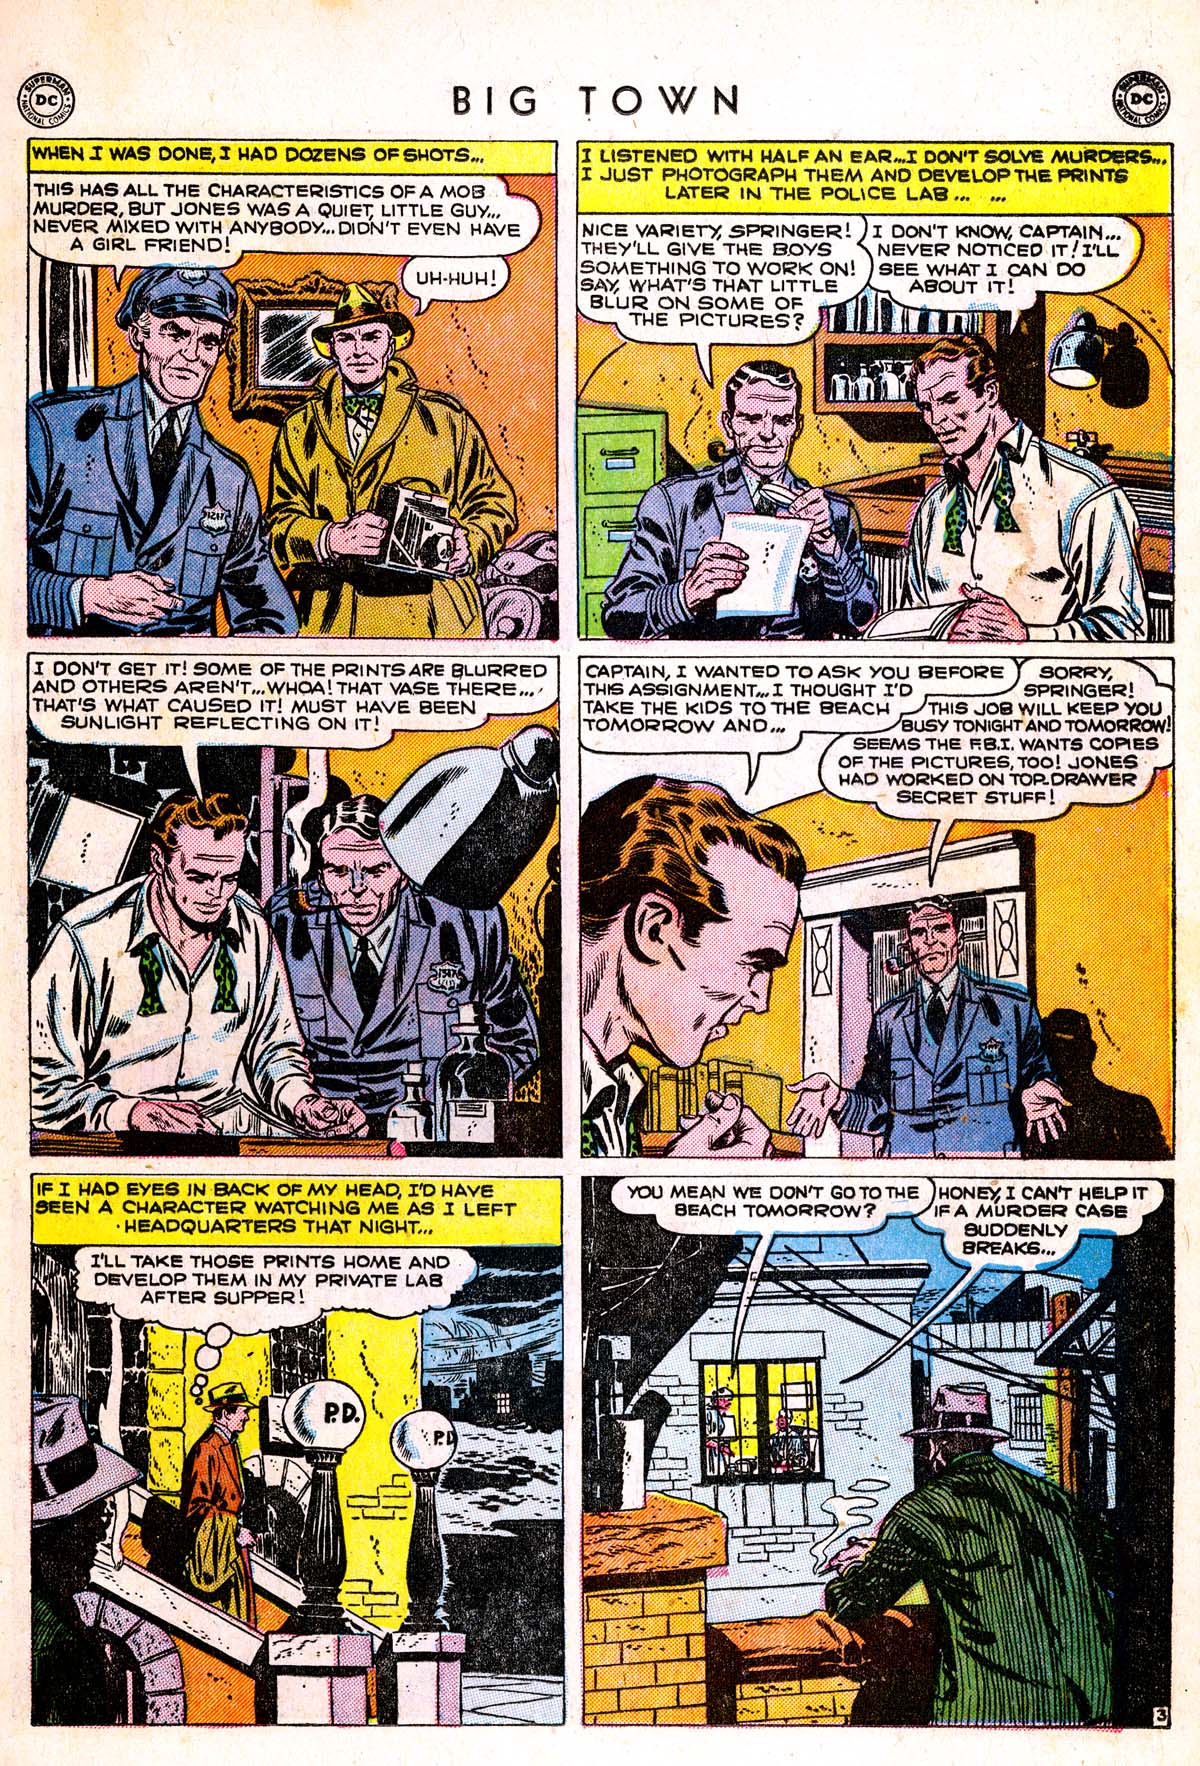 Big Town (1951) 1 Page 28